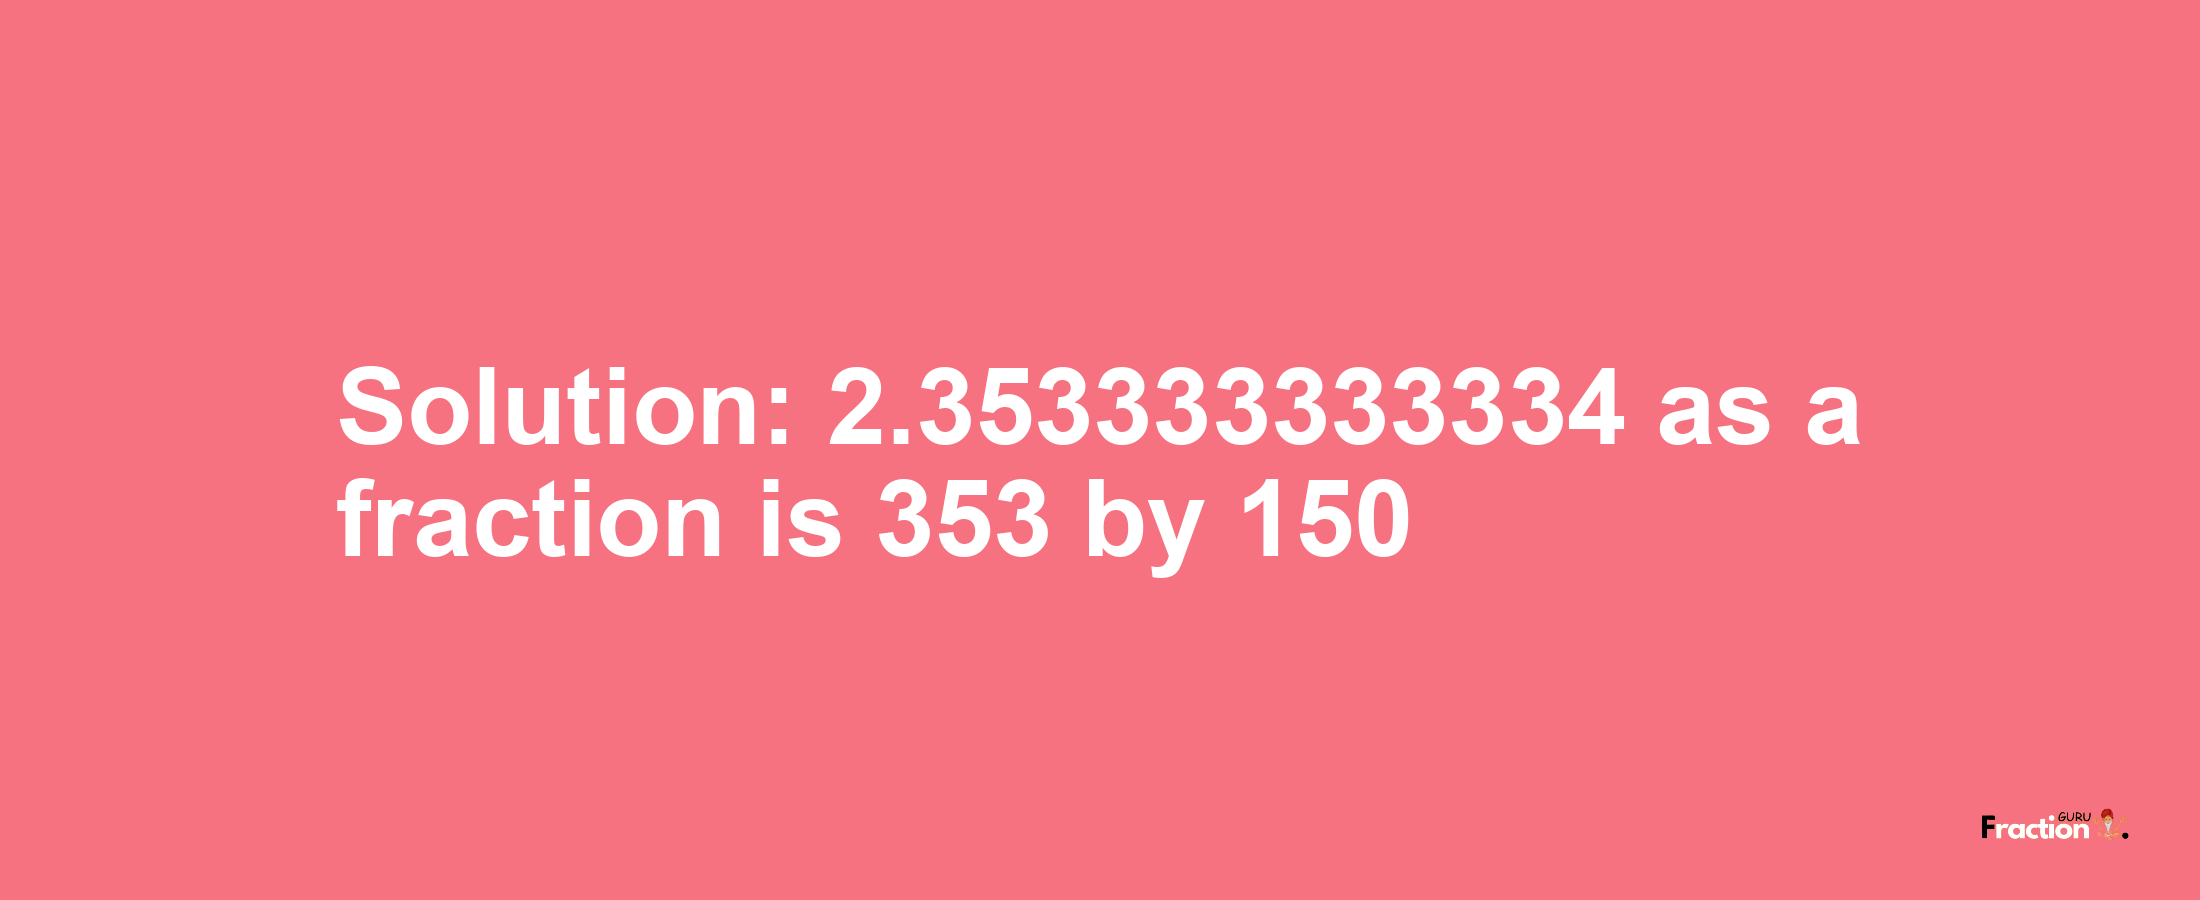 Solution:2.353333333334 as a fraction is 353/150